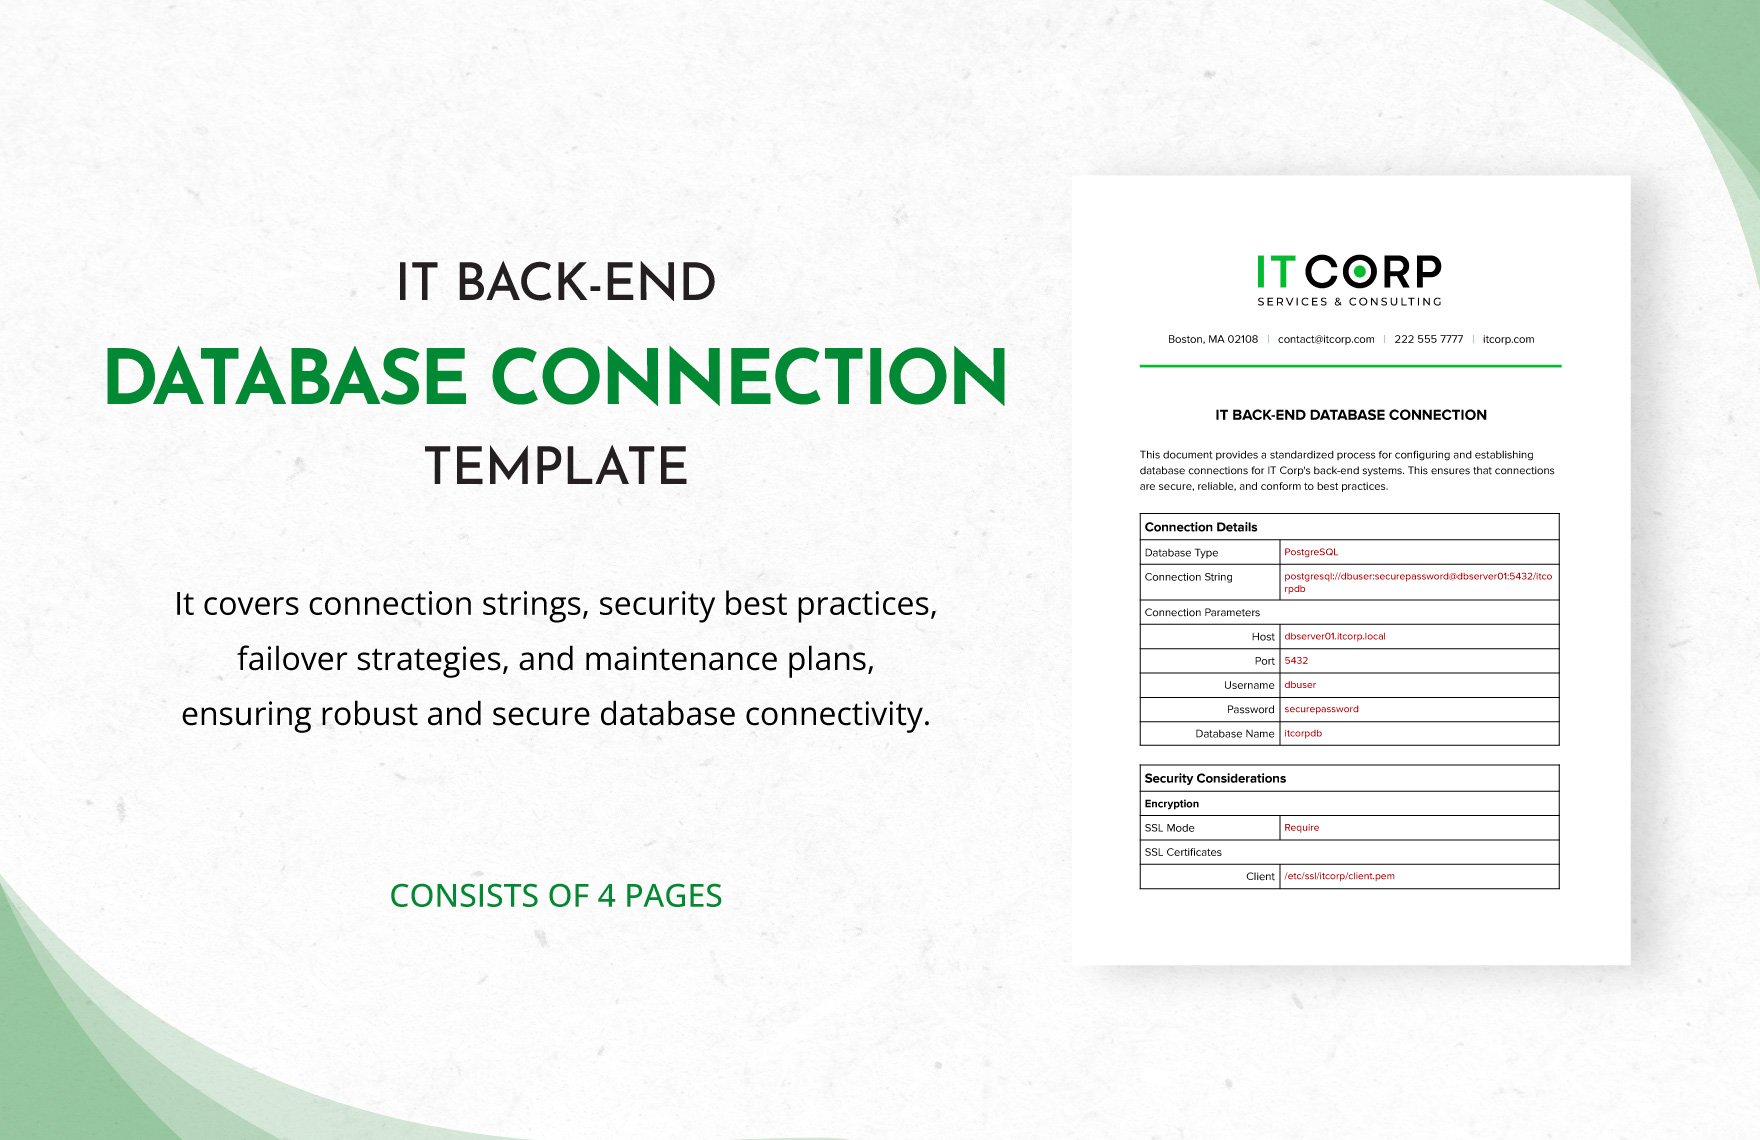 IT Back-End Database Connection Template